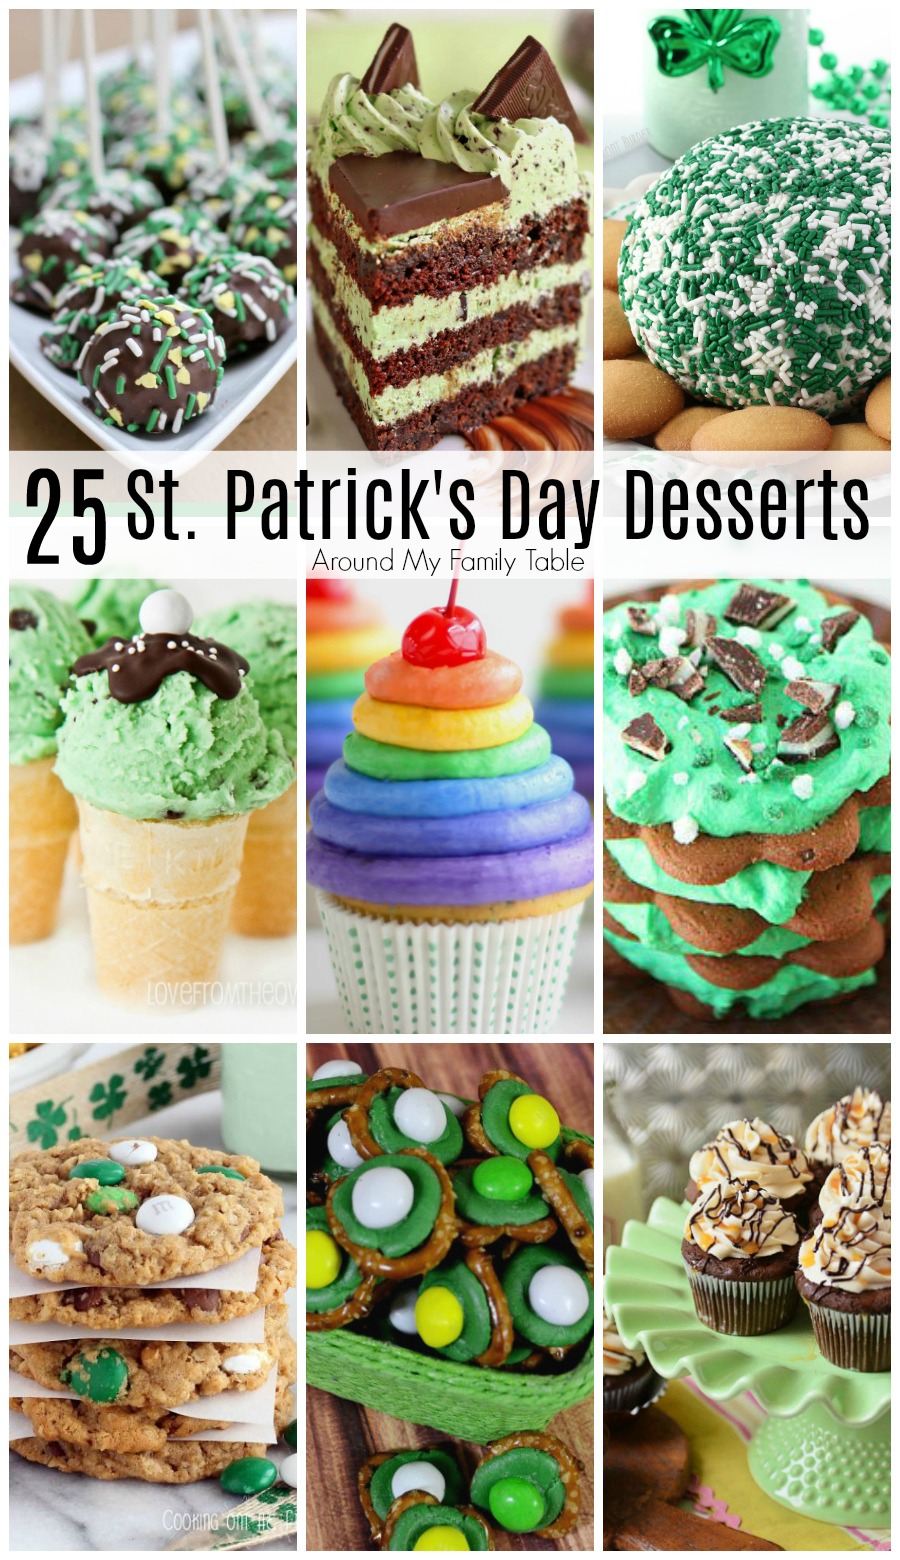 Have some fun with your favorite little leprechaun and whip up one (or a few) of these 25 St. Patrick’s Day Desserts that will have anyone saying, “Top ‘o the mornin’ to you!”